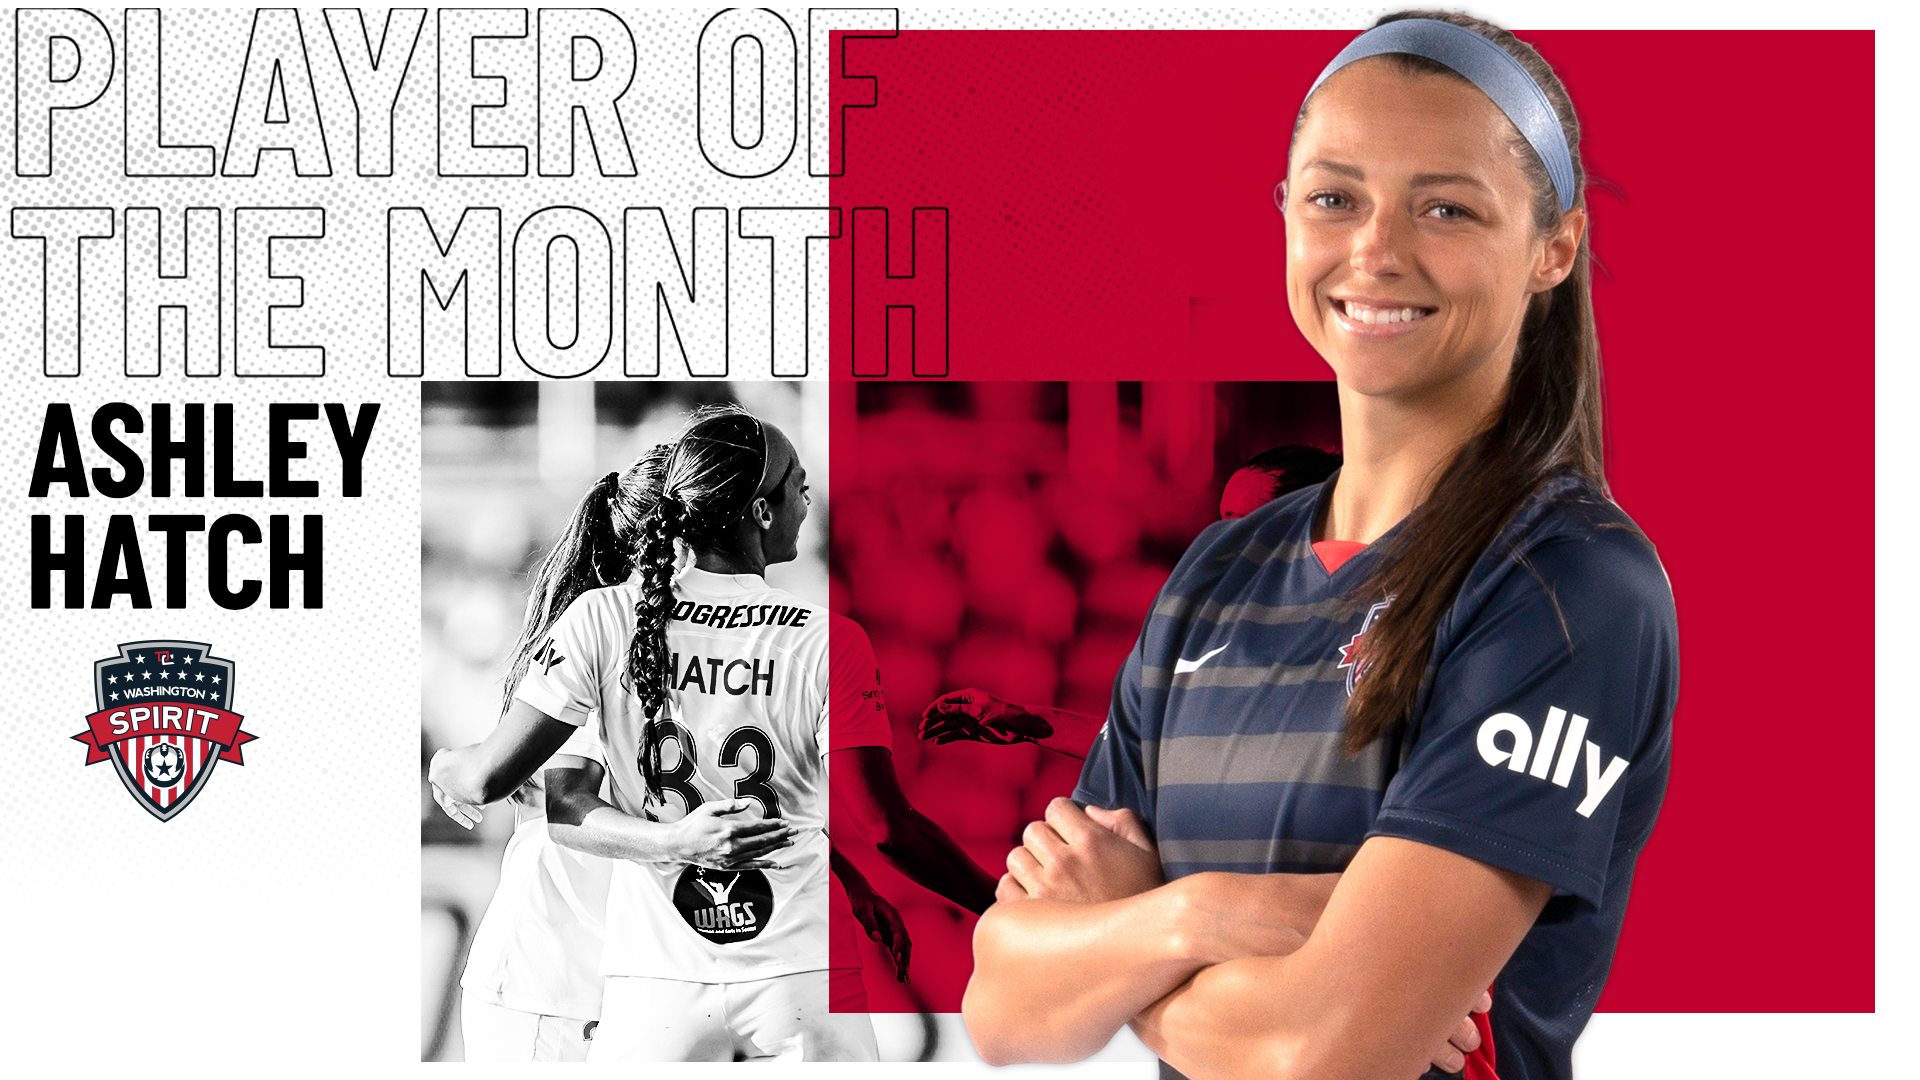 After Impressive Month of July, Hatch Named NWSL Player of the Month, Sullivan Also Named to Team of the Month Featured Image